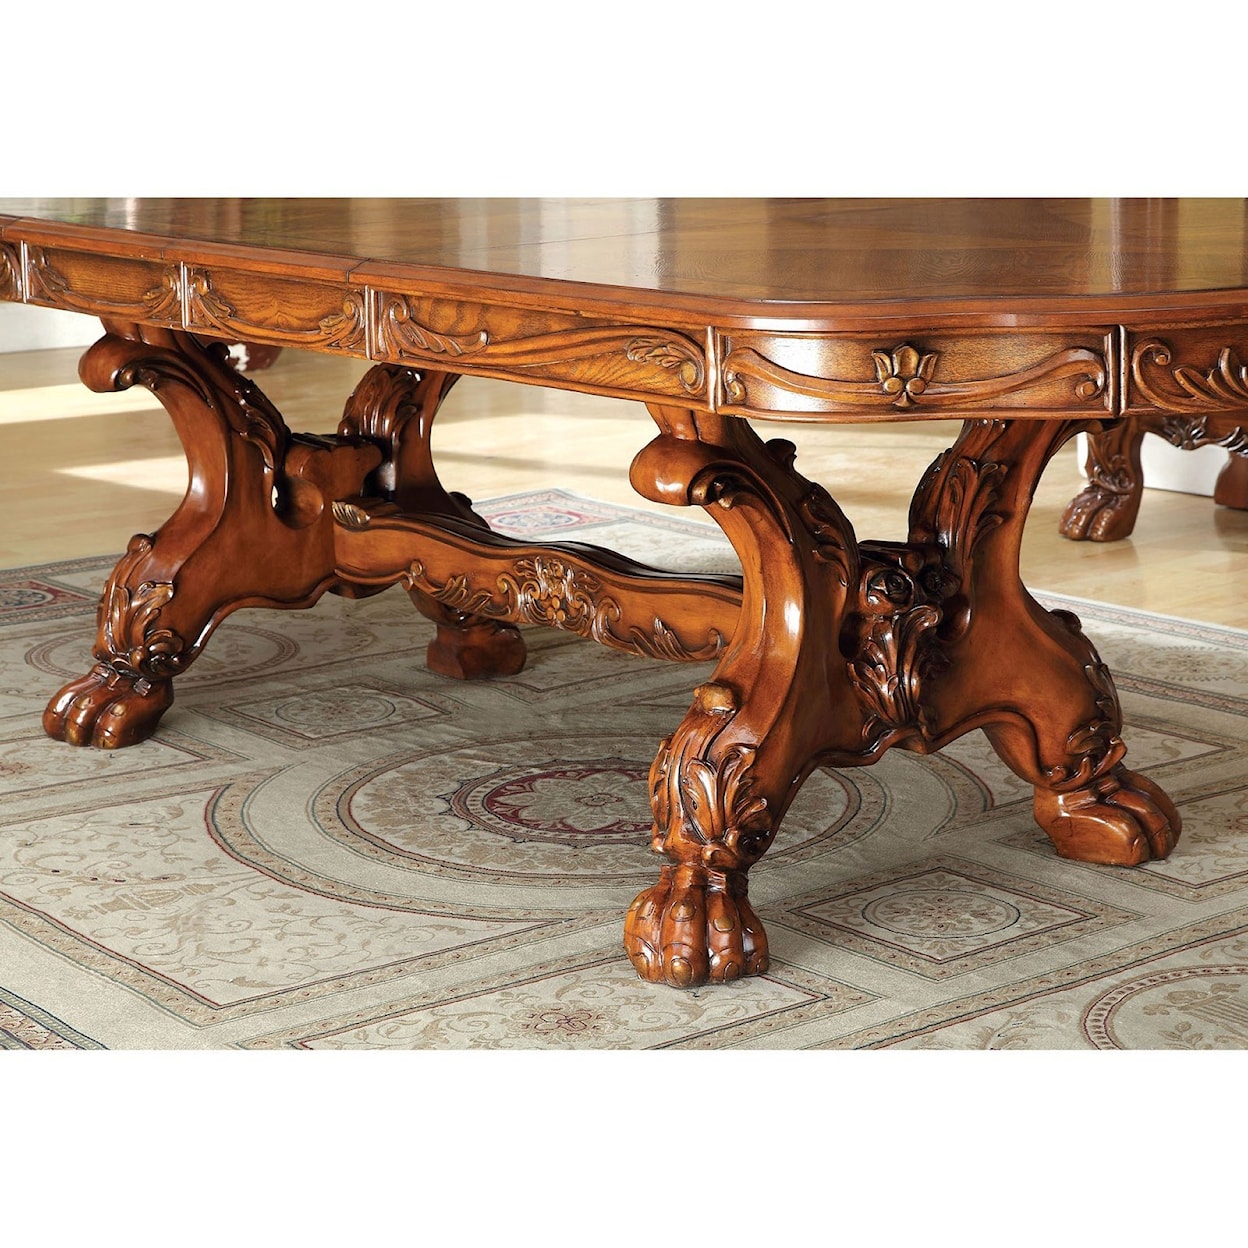 Furniture of America - FOA Medieve Dining Table